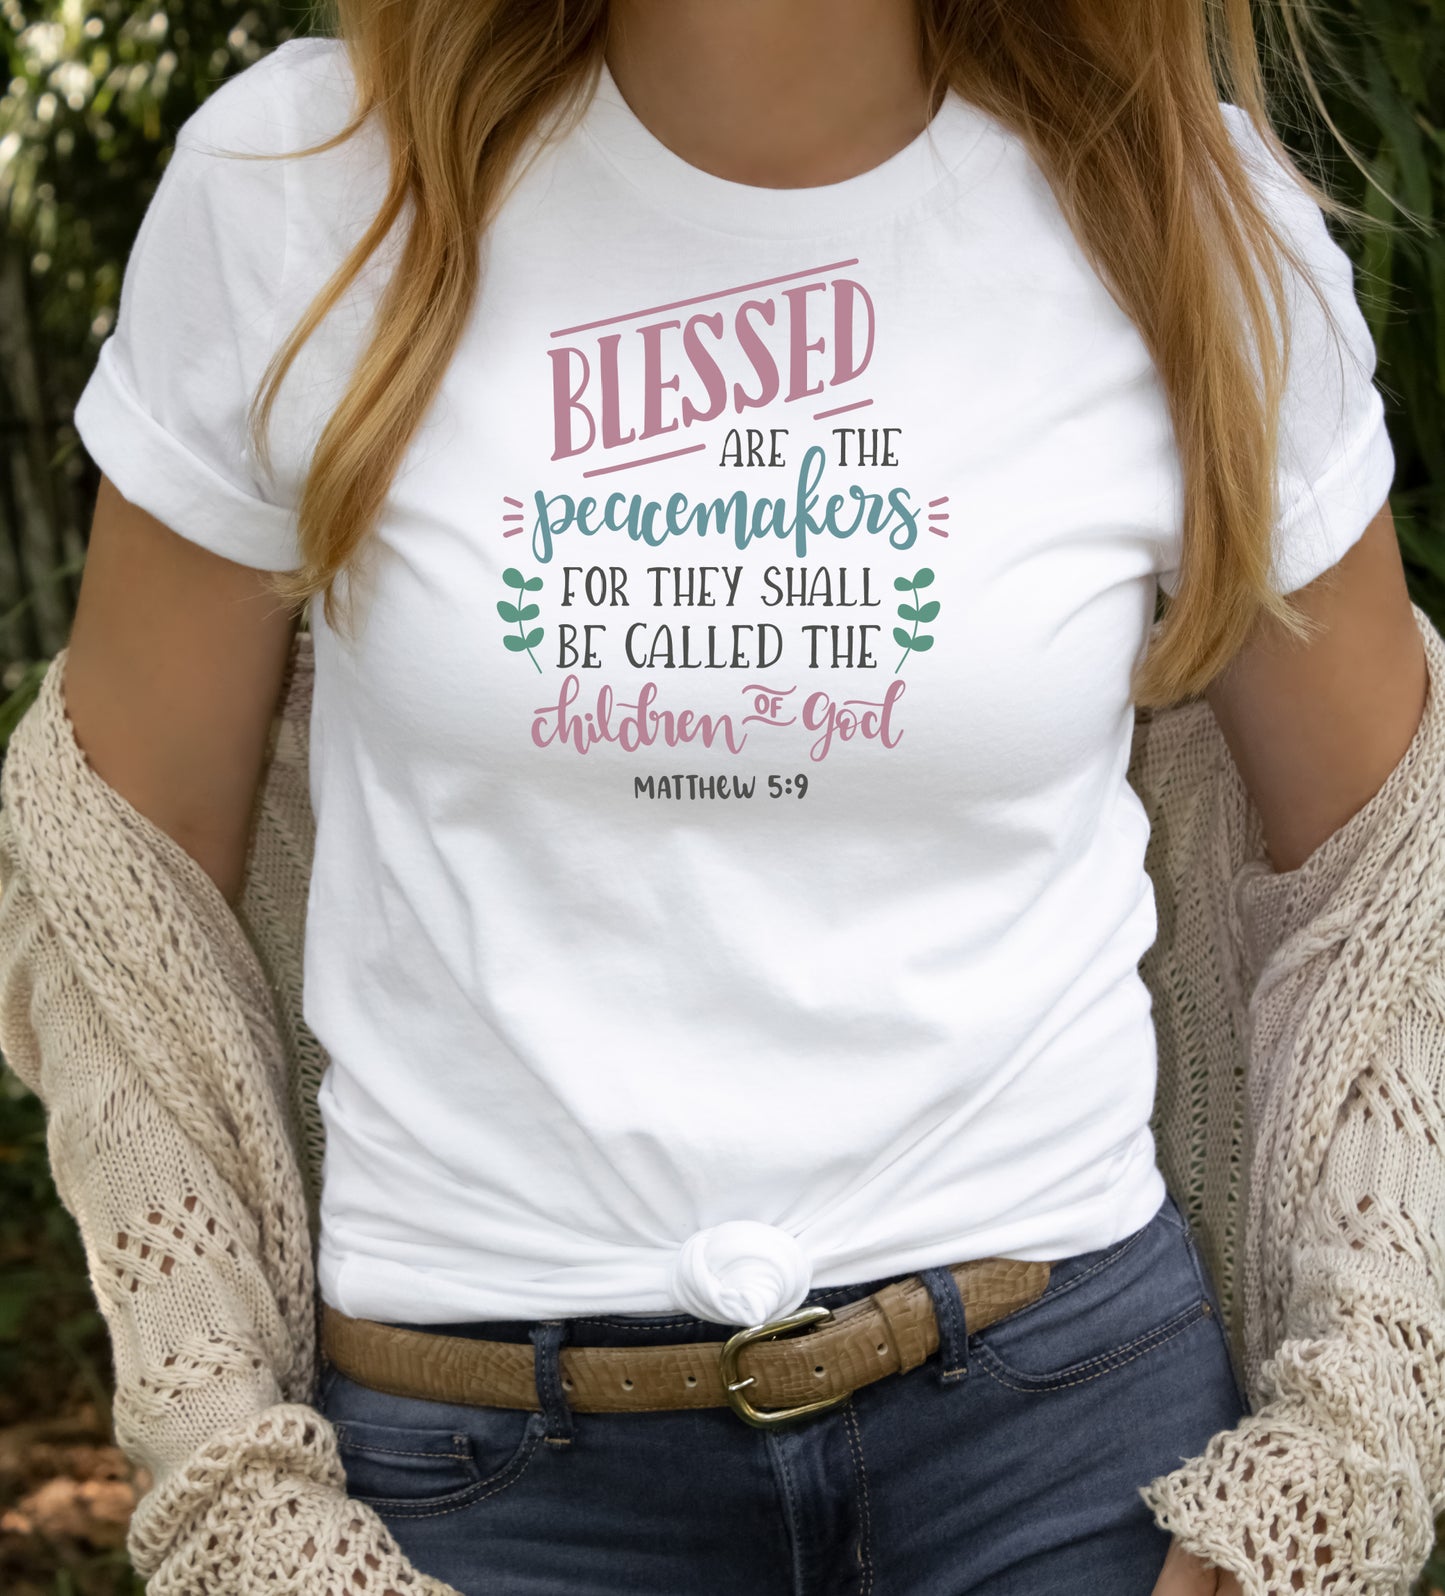 Blessed Are The peacemakers For They Shall Be Called The Children Of God, Matthew 5:9 short sleeve unisex T-Shirt